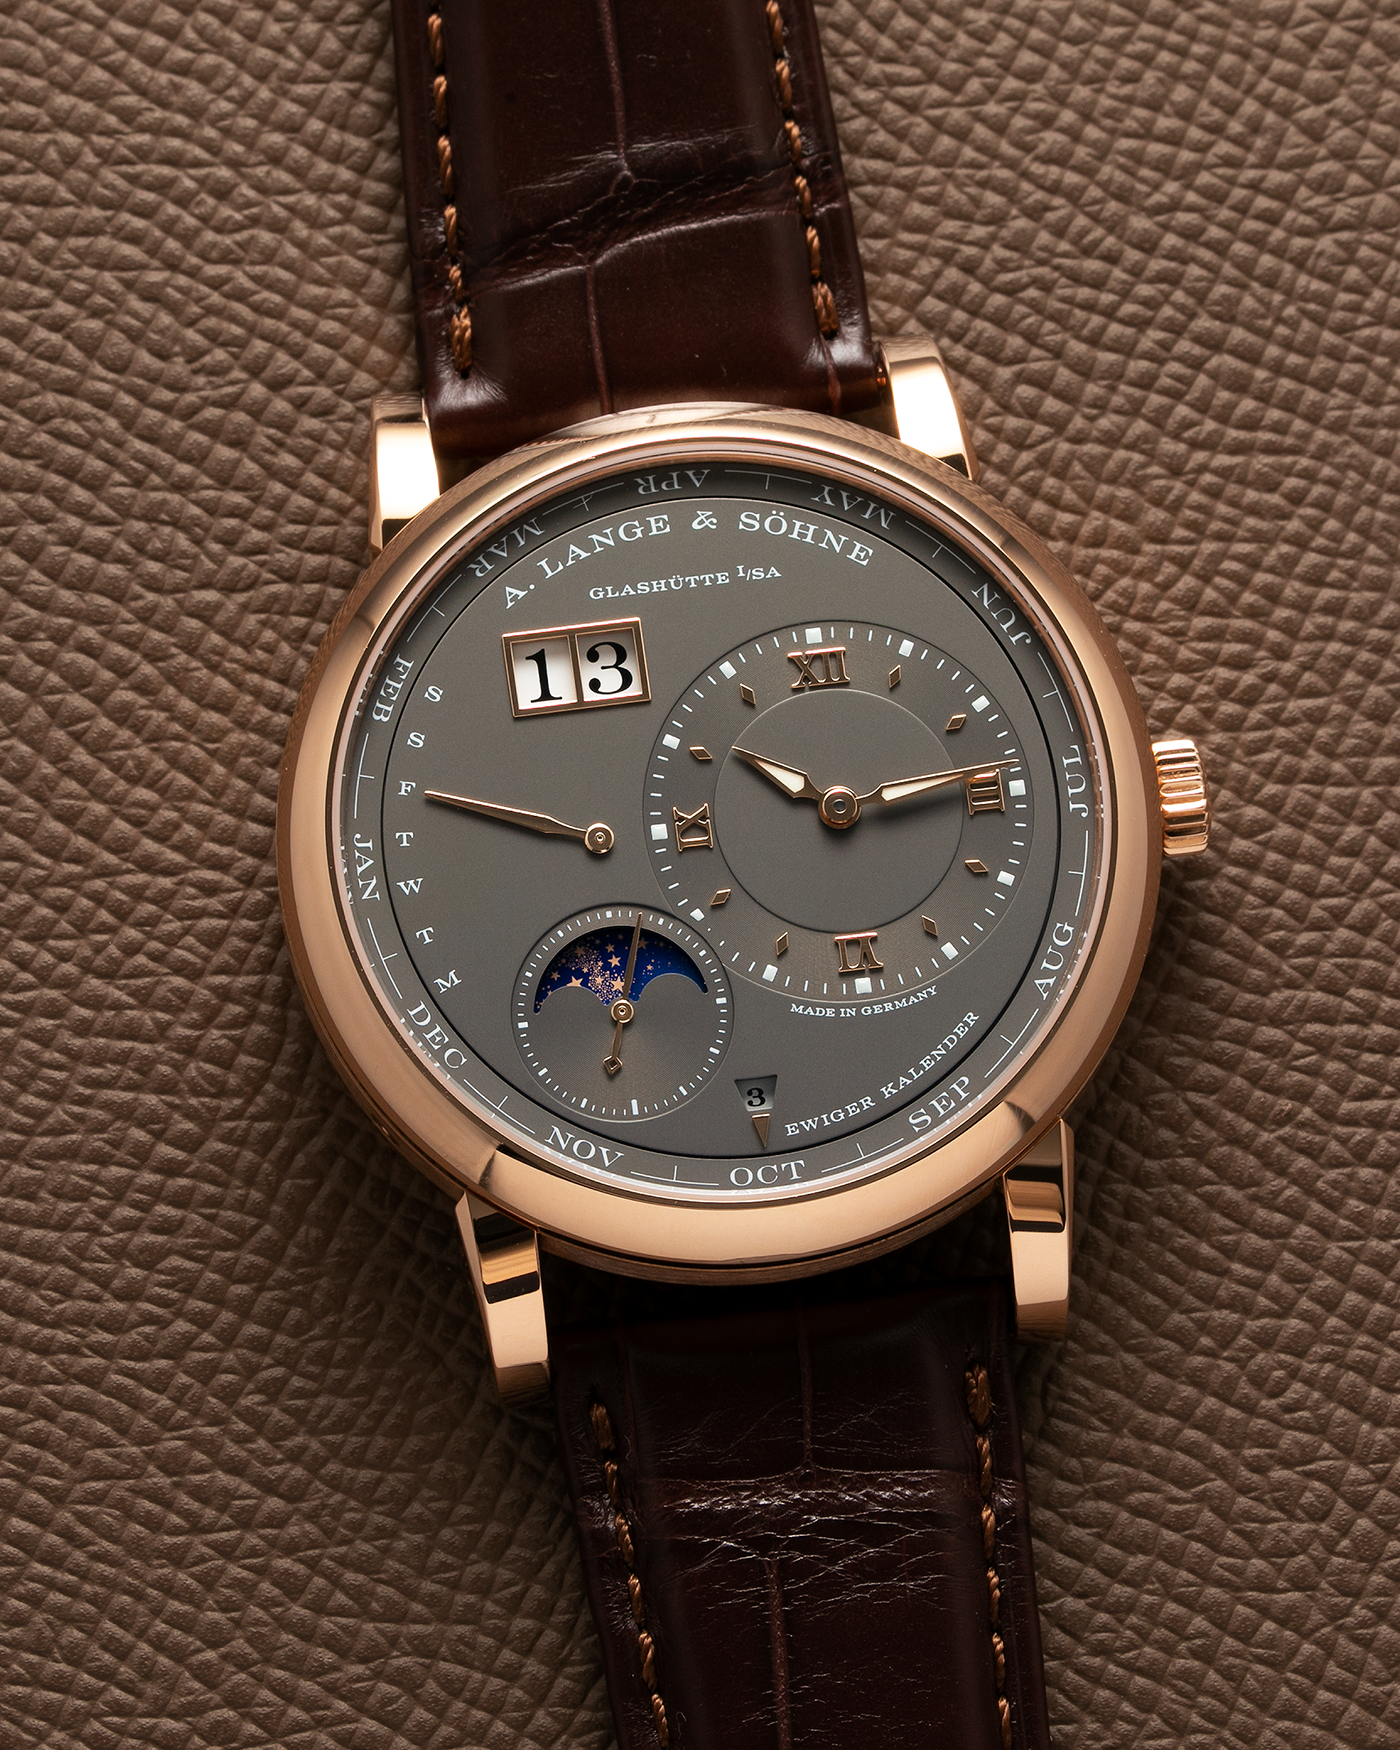 Brand: A. Lange & Söhne Year: 2022 Model: Lange 1 Perpetual Calendar Reference Number: 345.033 E Material: 18-carat Rose Gold Case Movement: A. Lange & Söhne Cal. L021.3, Self-Winding Case Dimensions: 41.9mm x 12.1mm Lug Width: 22mm Strap: A. Lange & Söhne Dark Brown Alligator Strap with 18-carat Rose Gold Tang Buckle, and additional Generic Grey Nubuck Stitched Leather Strap